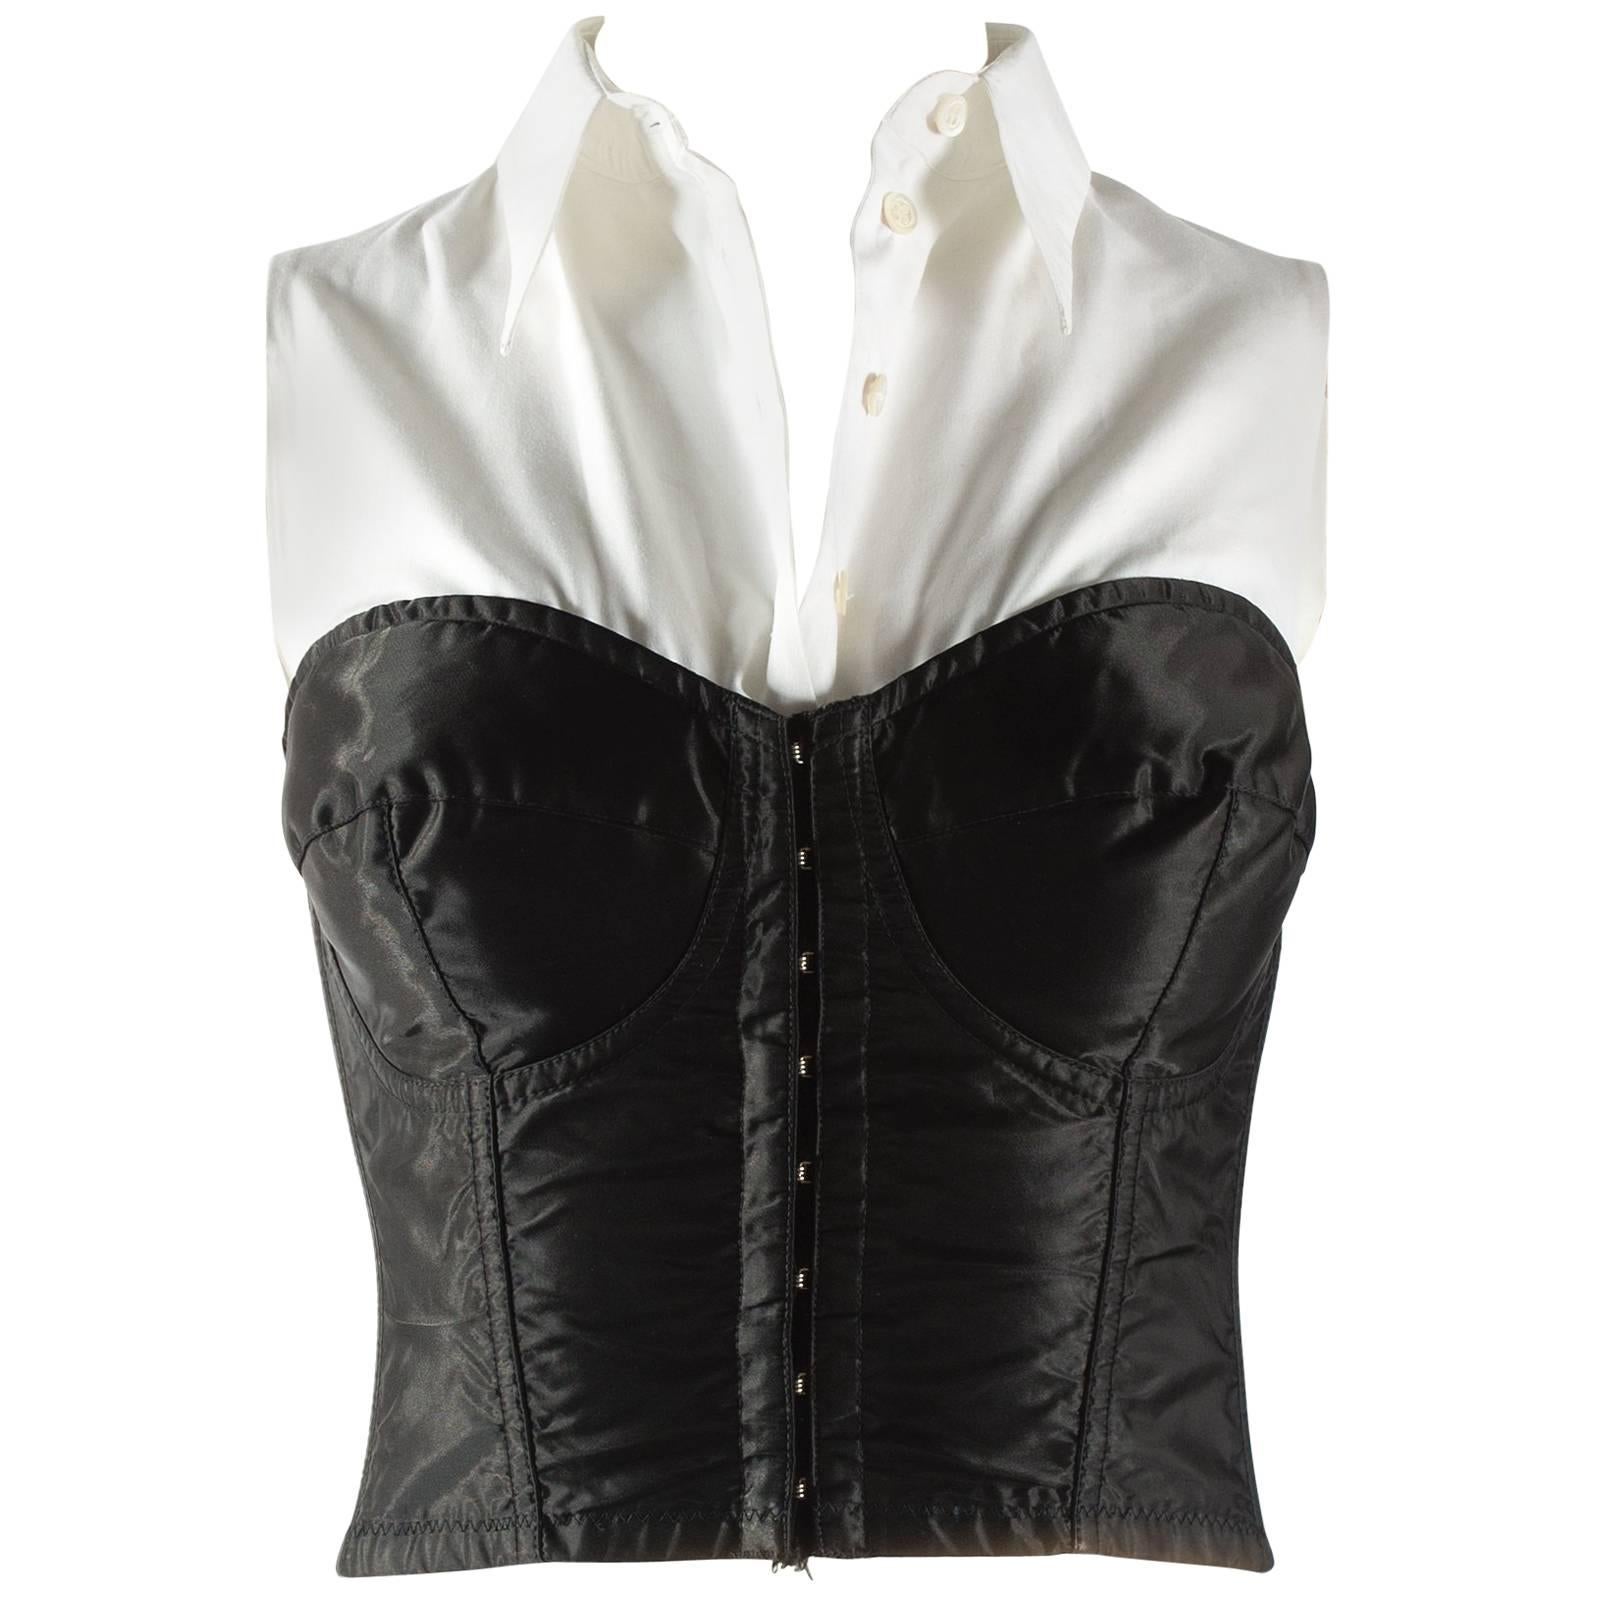 Dolce & Gabbana black satin and lycra corset with attached white shirt, aw 1992